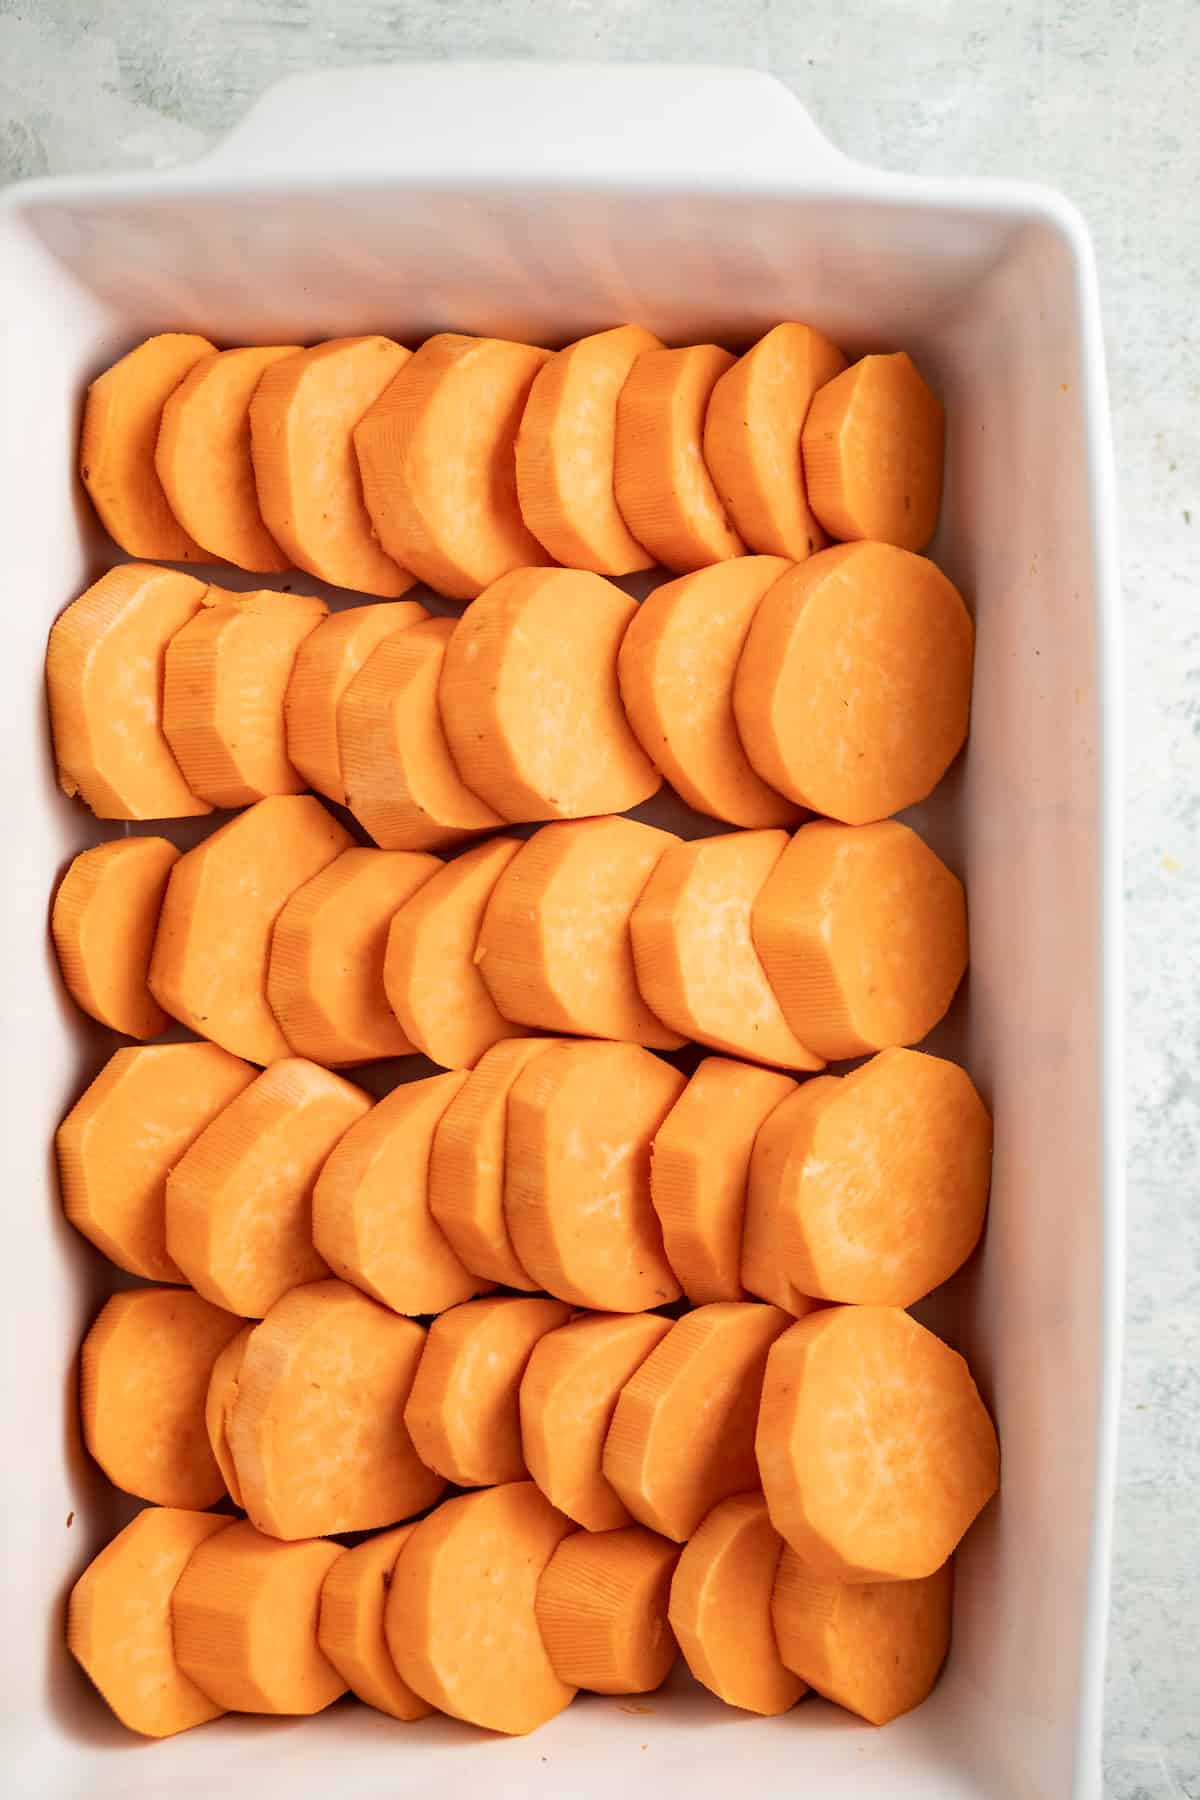 Arranging the sweet potatoes in the baking dish.